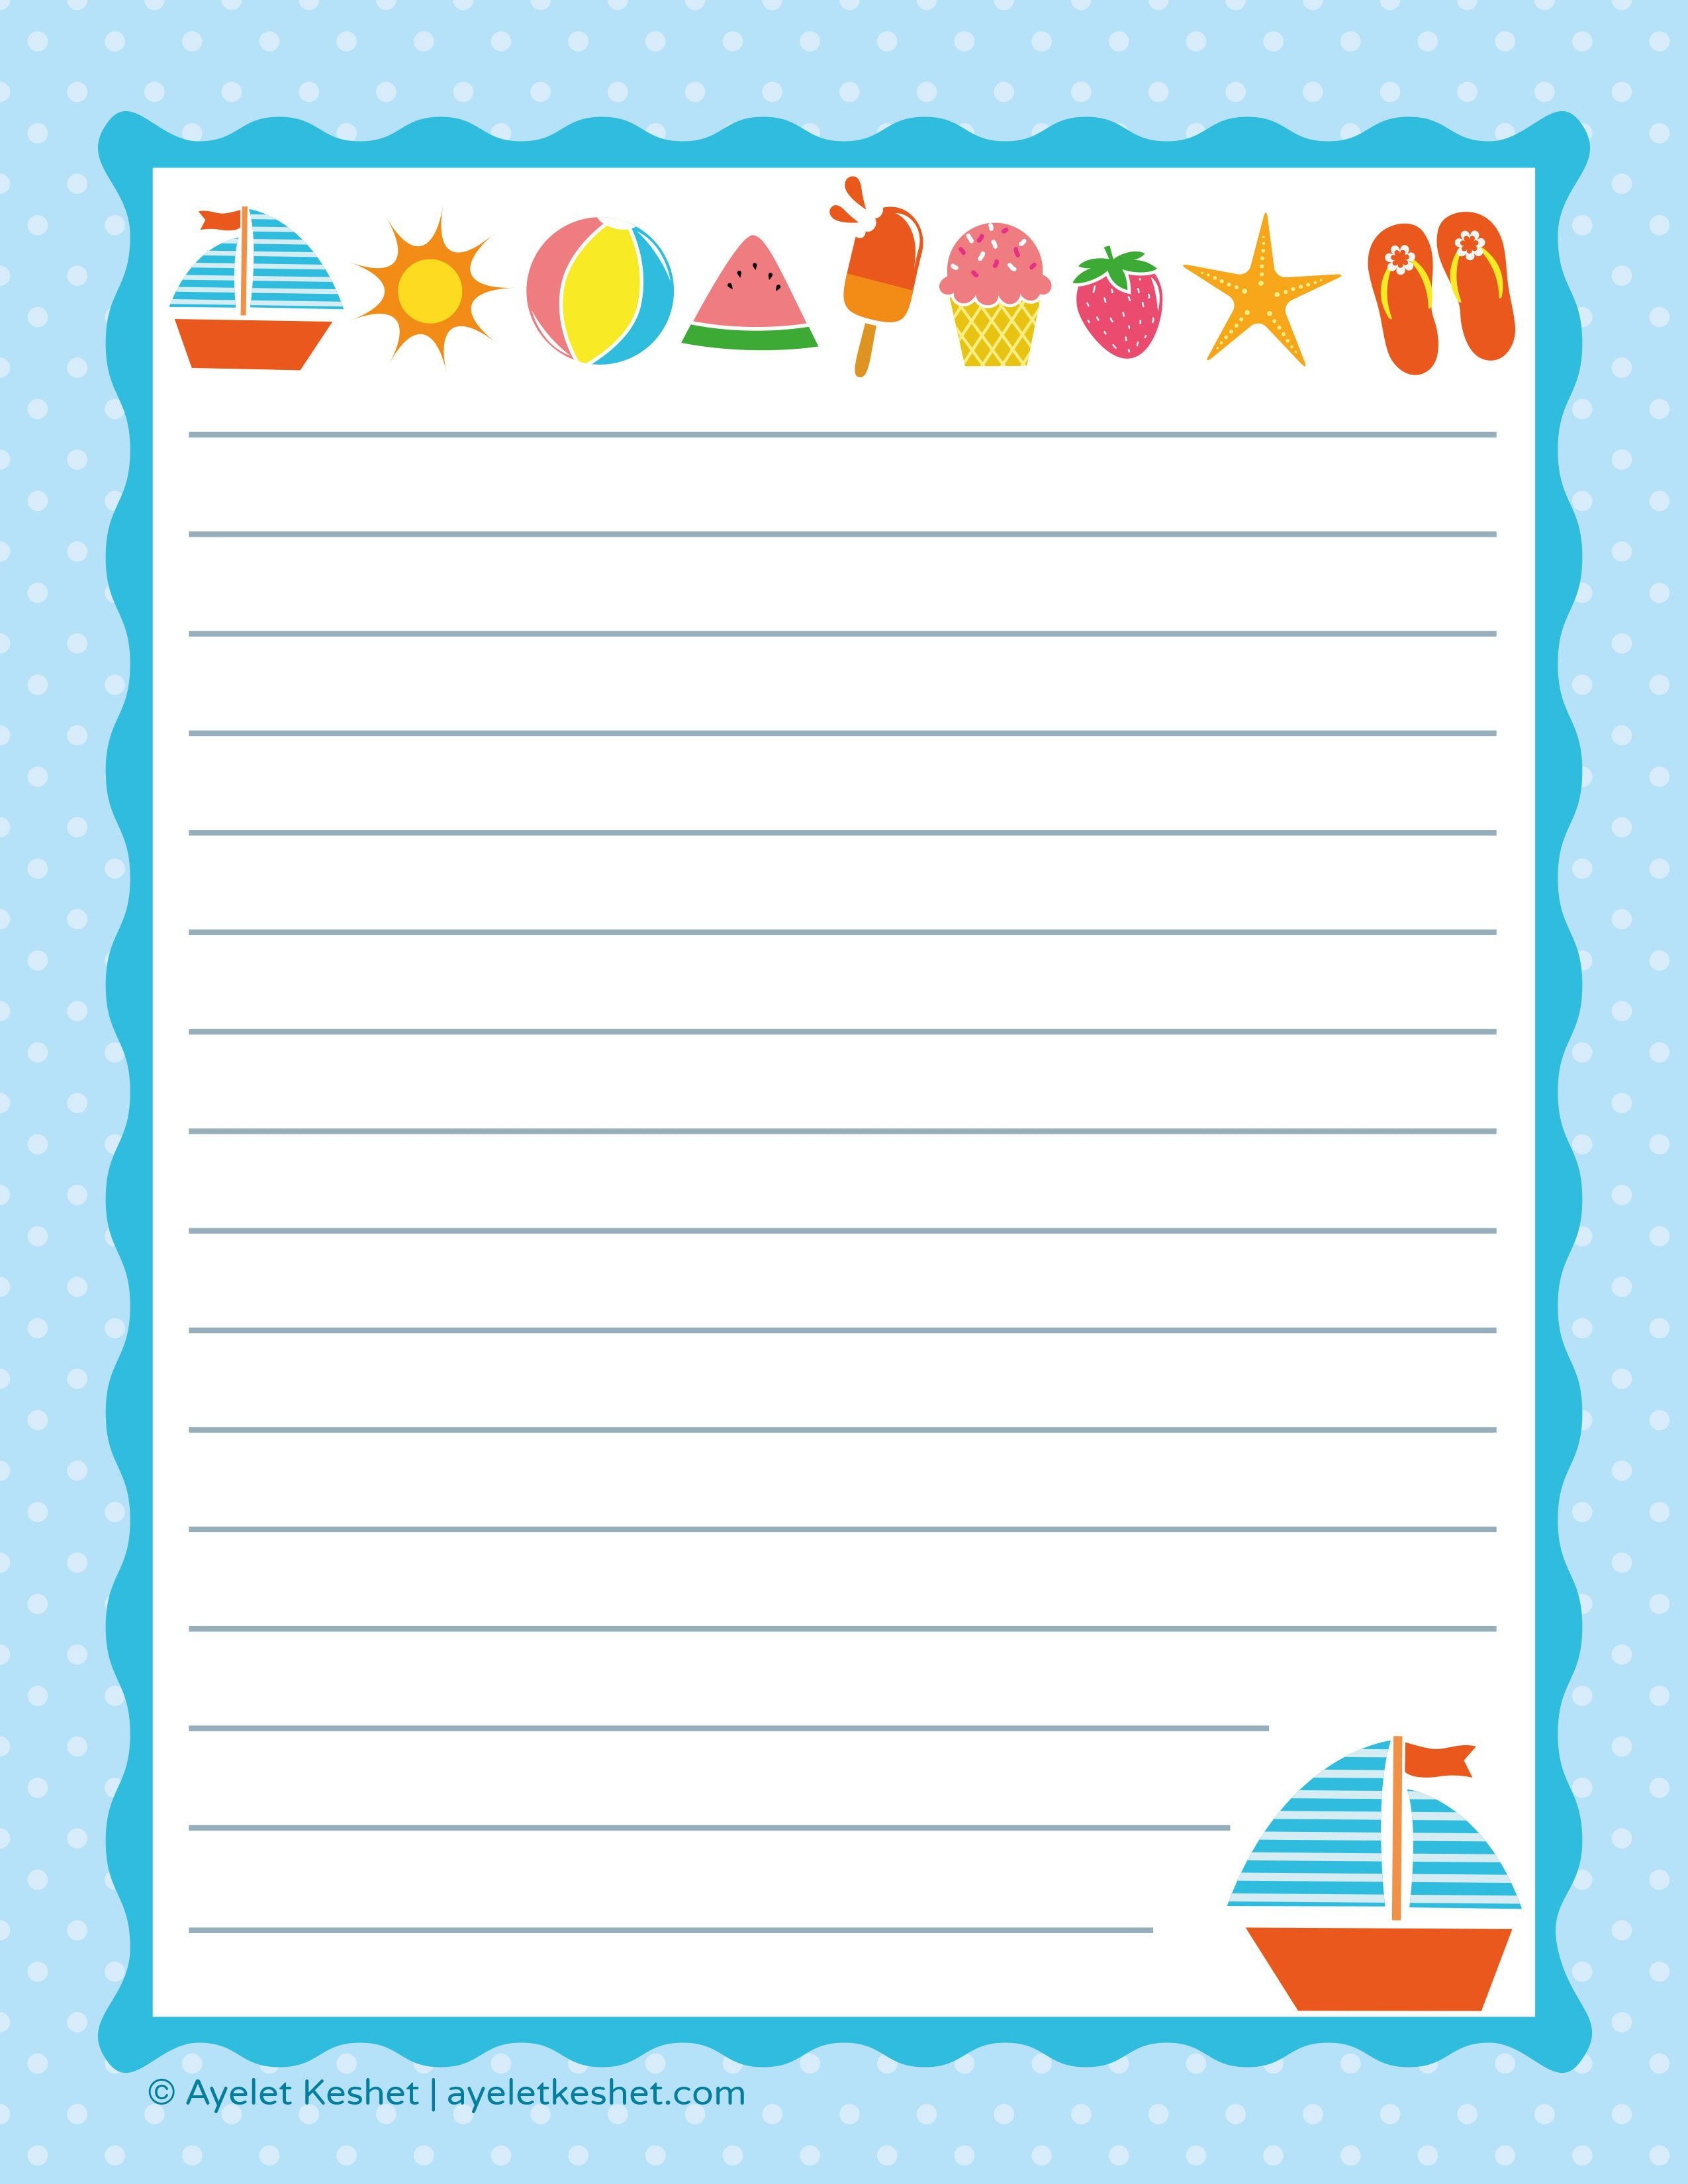 Free Printable Letter Paper | Printables To Go | Printable Letters - Free Printable Stationery Paper